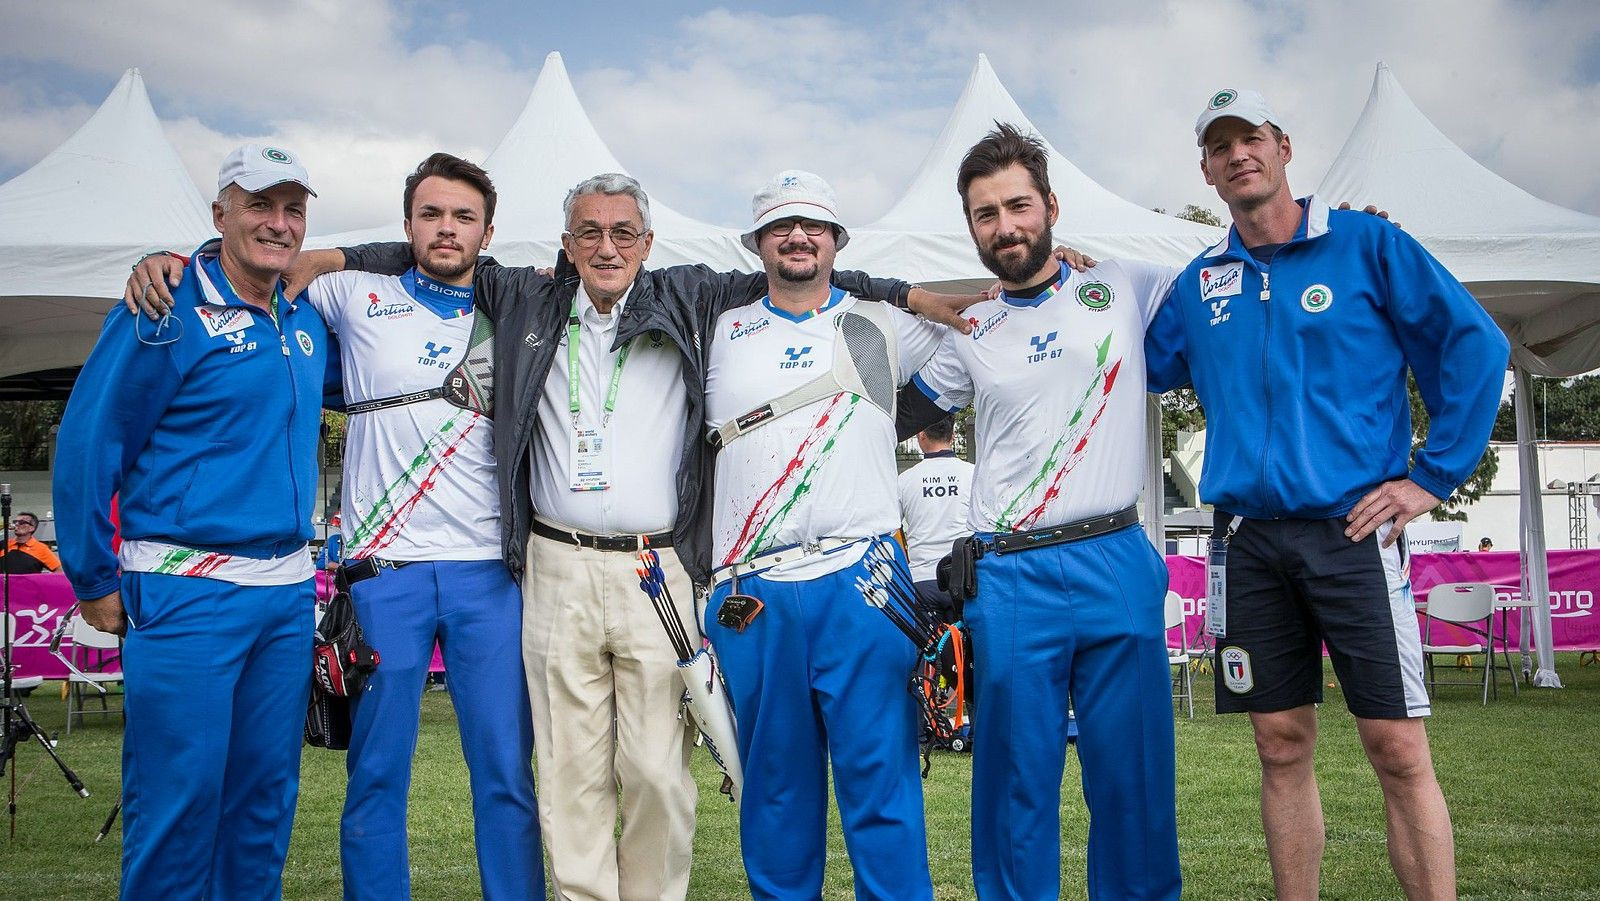 Italy, pictured, will play France in the men's team recurve final ©World Archery